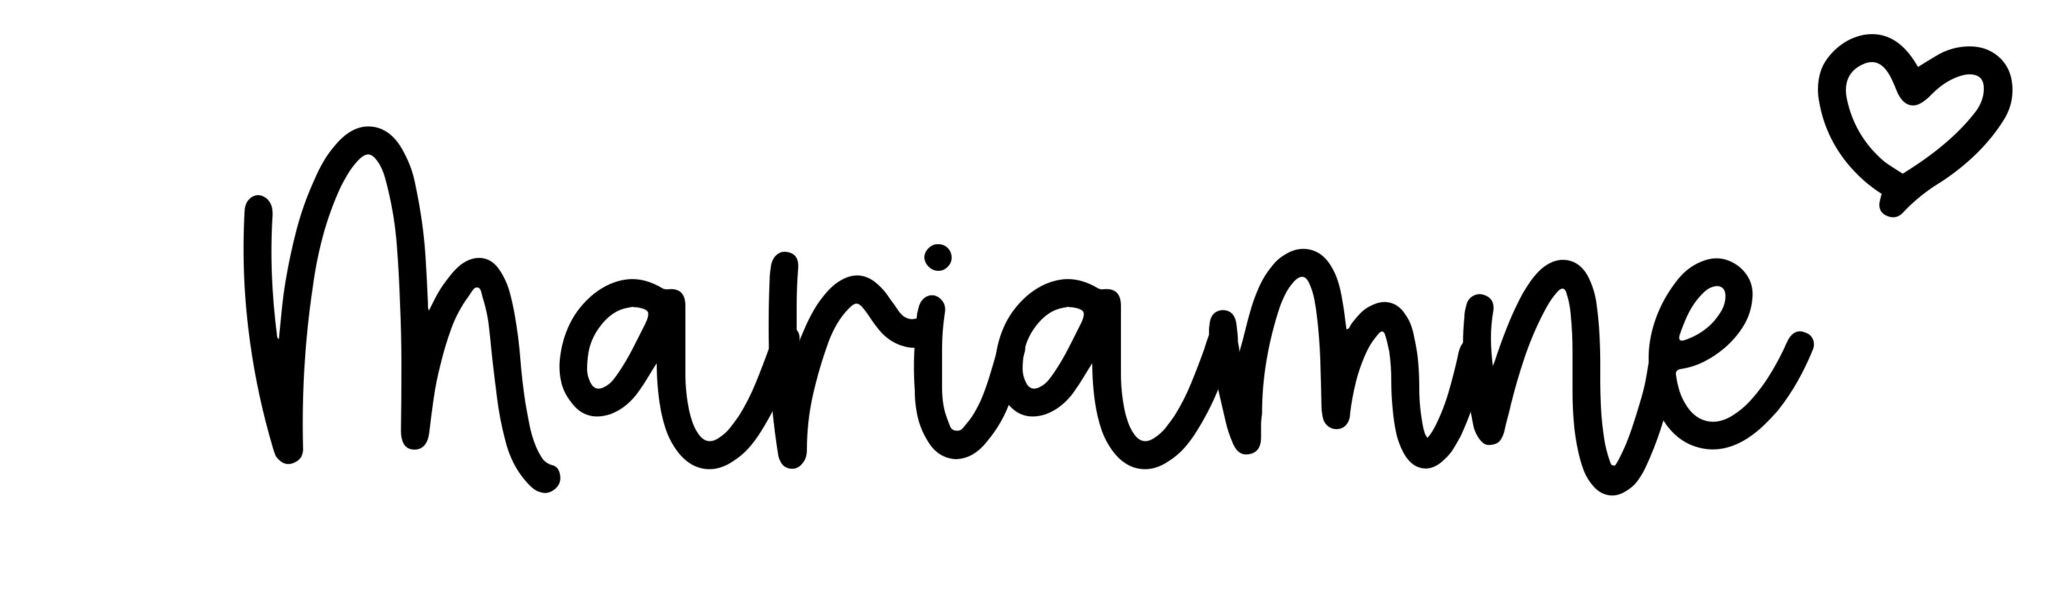 Mariamne - Name meaning, origin, variations and more